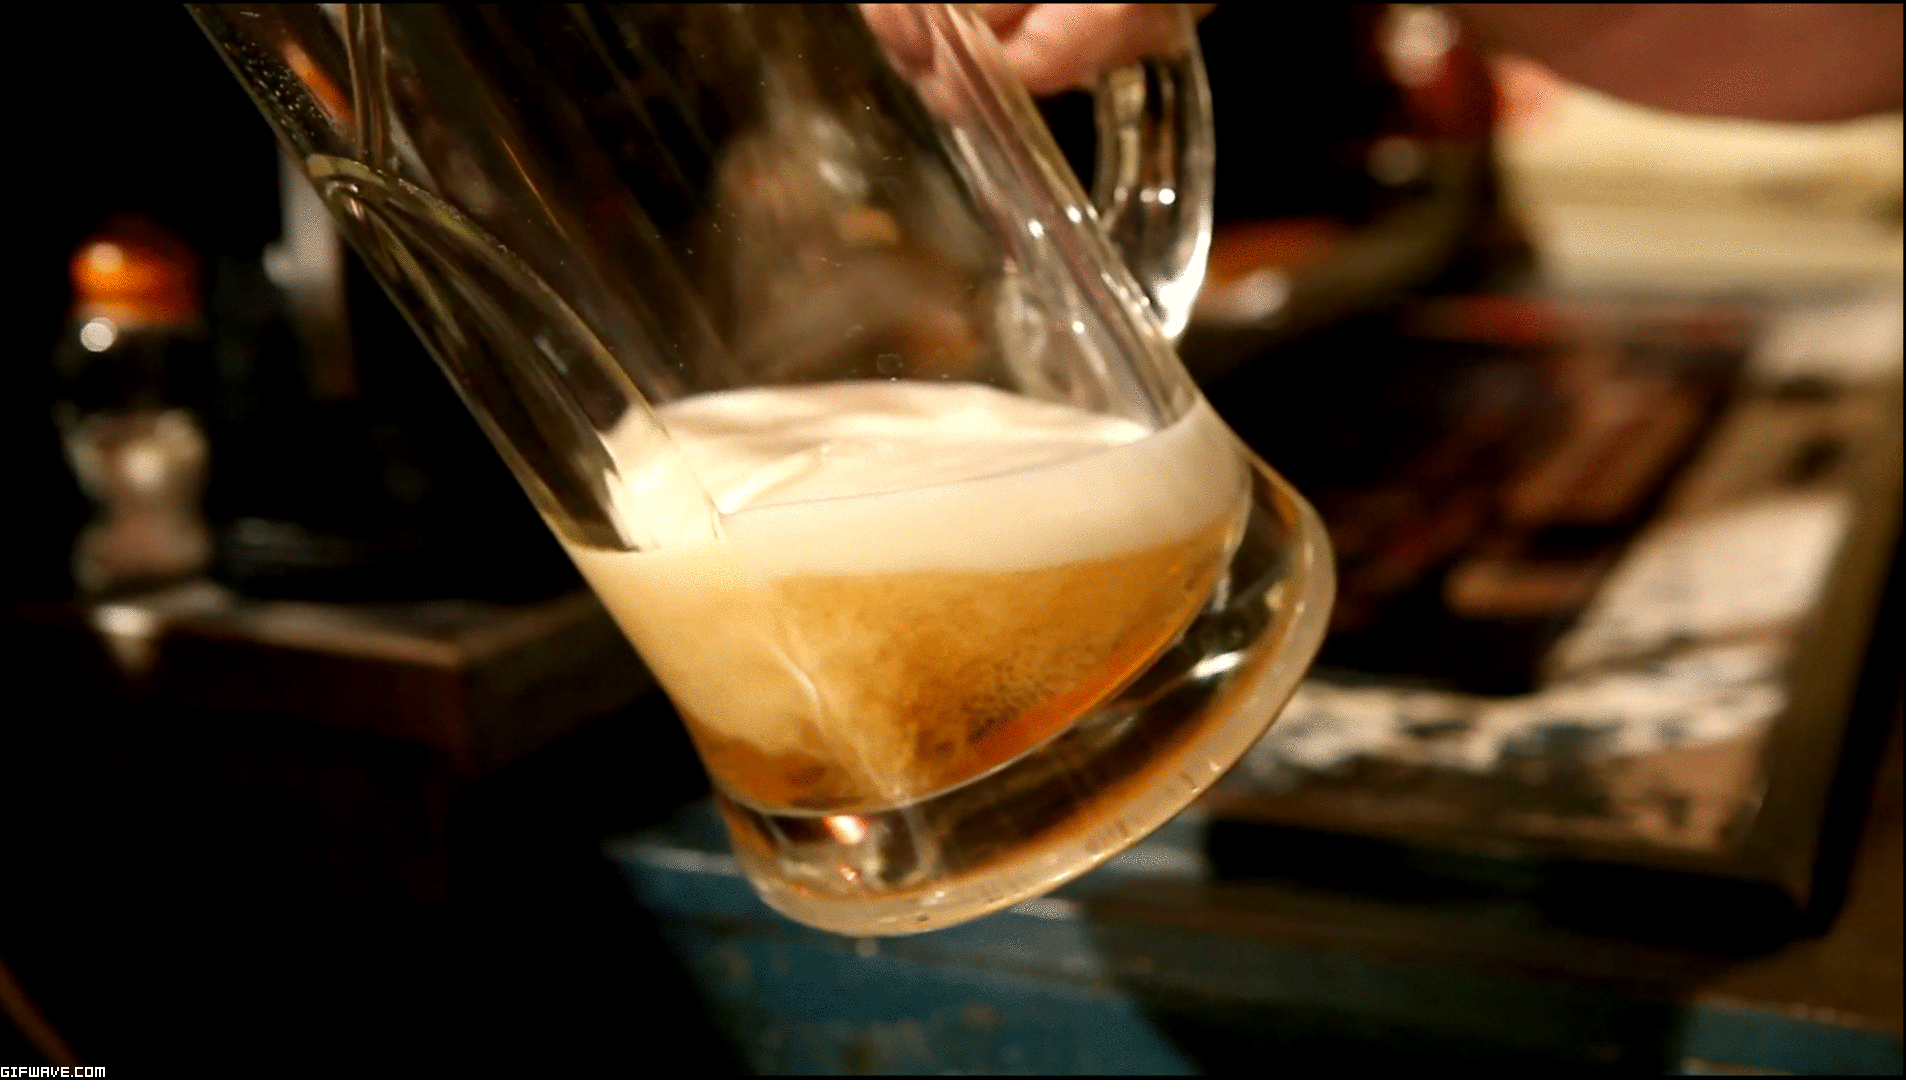 http://media.topito.com/wp-content/uploads/2015/01/beer-cinemagraph.gif